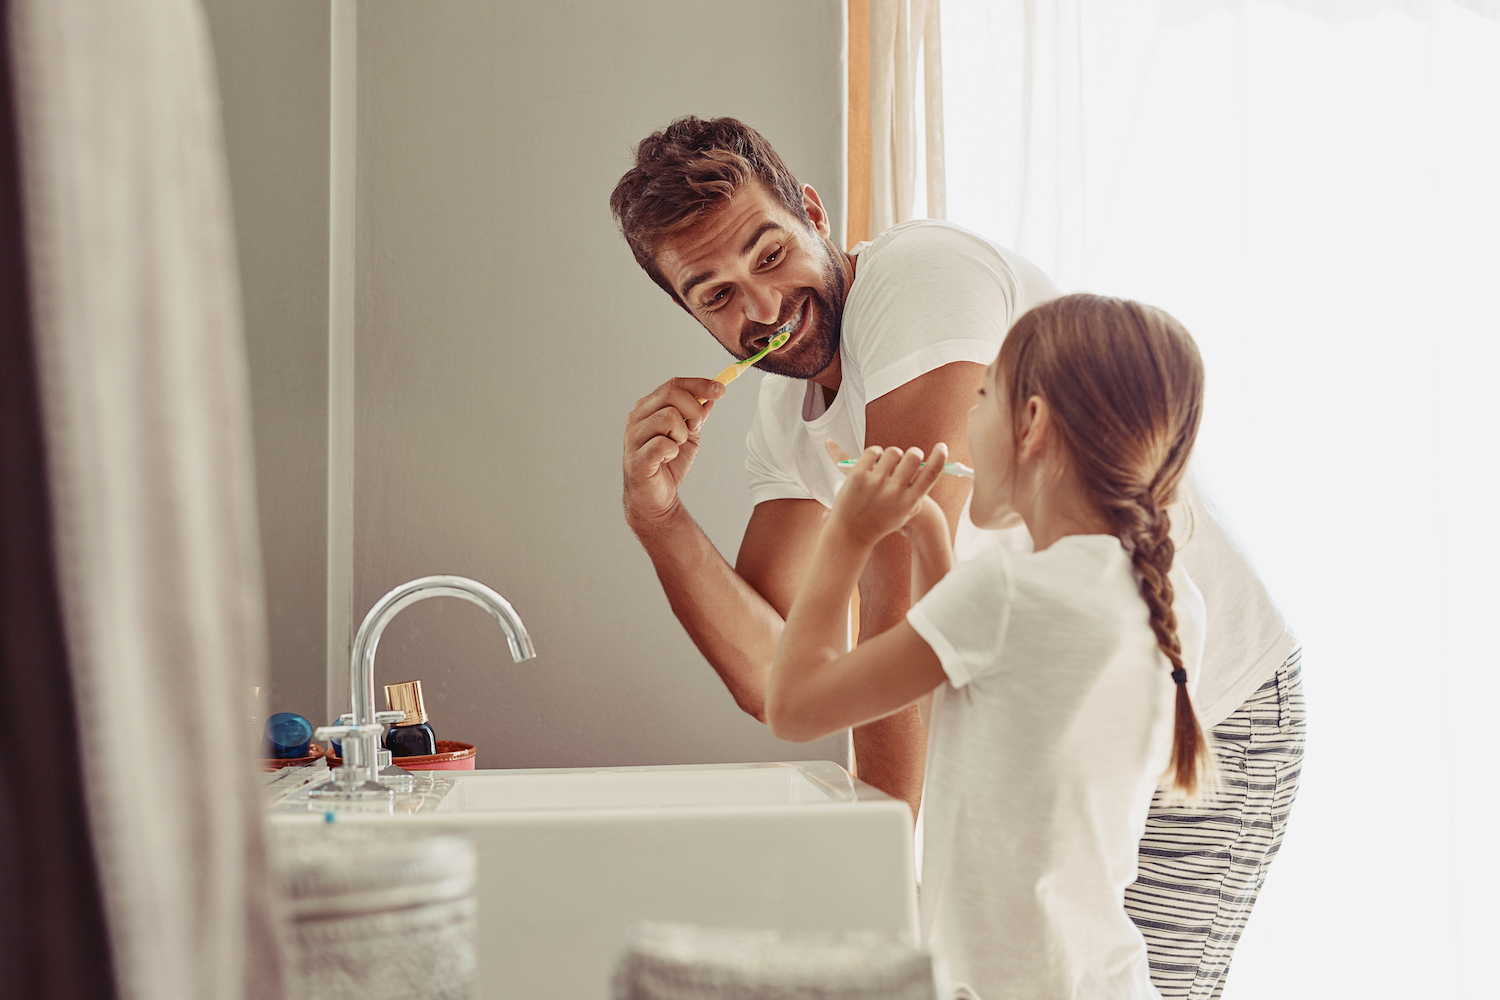 oral health routine, father brushing teeth with daughter, healthy smile, healthy teeth